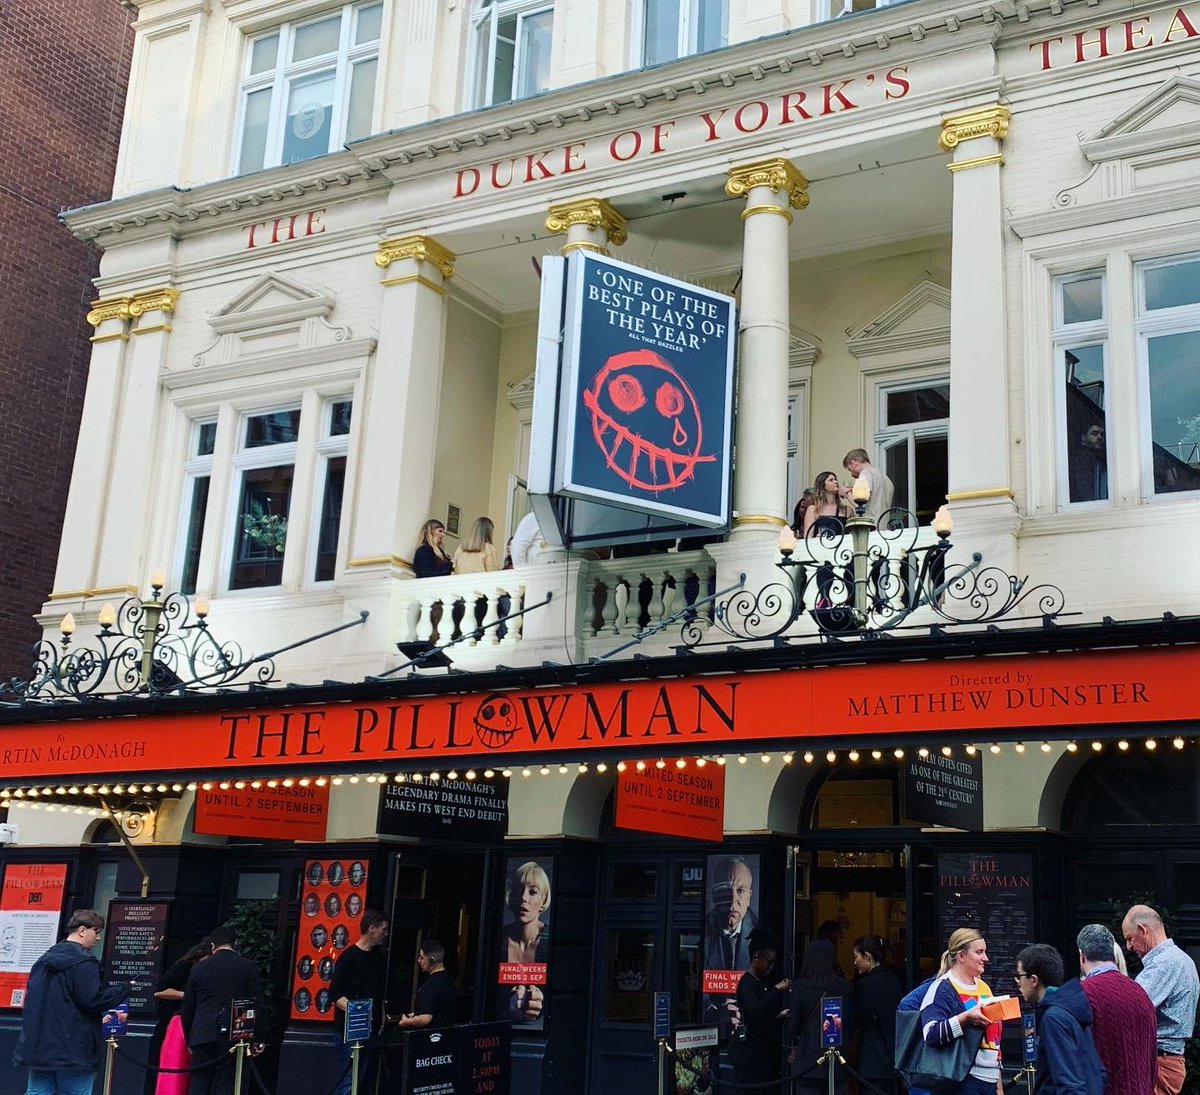 Got to see “The Pillowman” tonight on the West End. HUGE shoutout to @lilyallen on an INCREDIBLE performance as Katurian. This was a stellar production of an extremely difficult play.